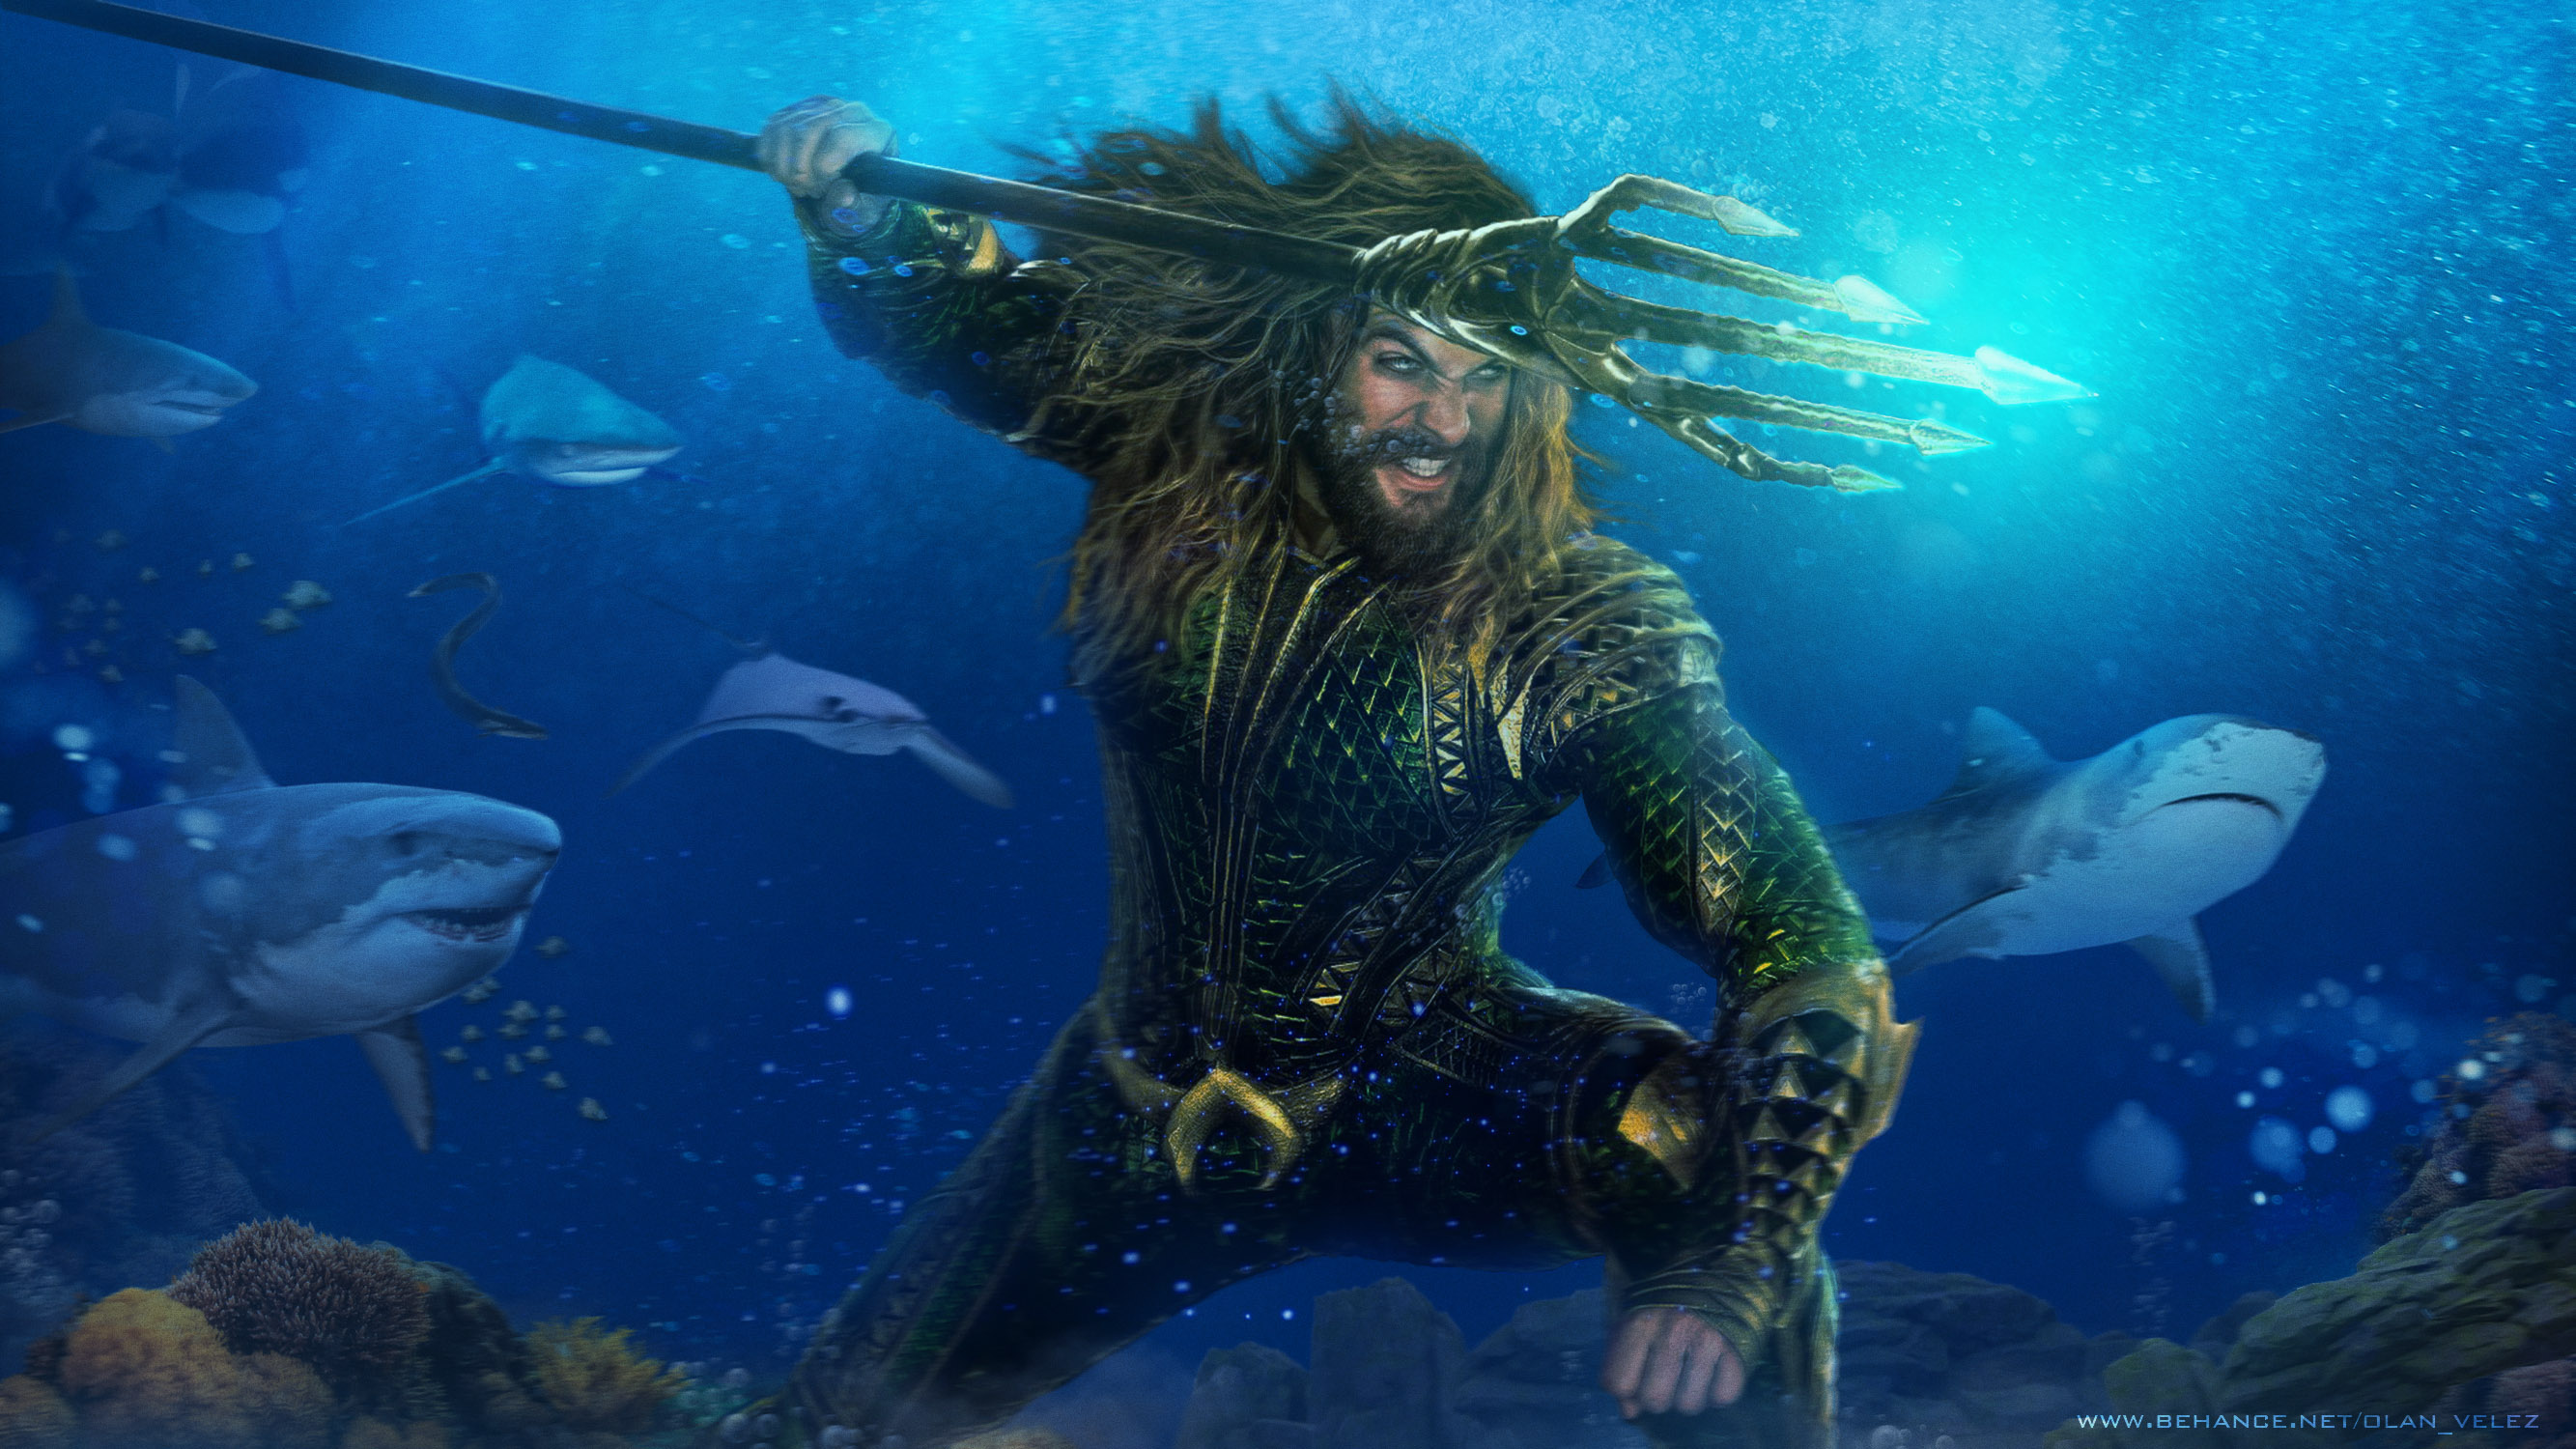 Aquaman Protector Of The Oceans, HD Movies, 4k Wallpapers, Images, Backgrounds, Photos ...2667 x 1500